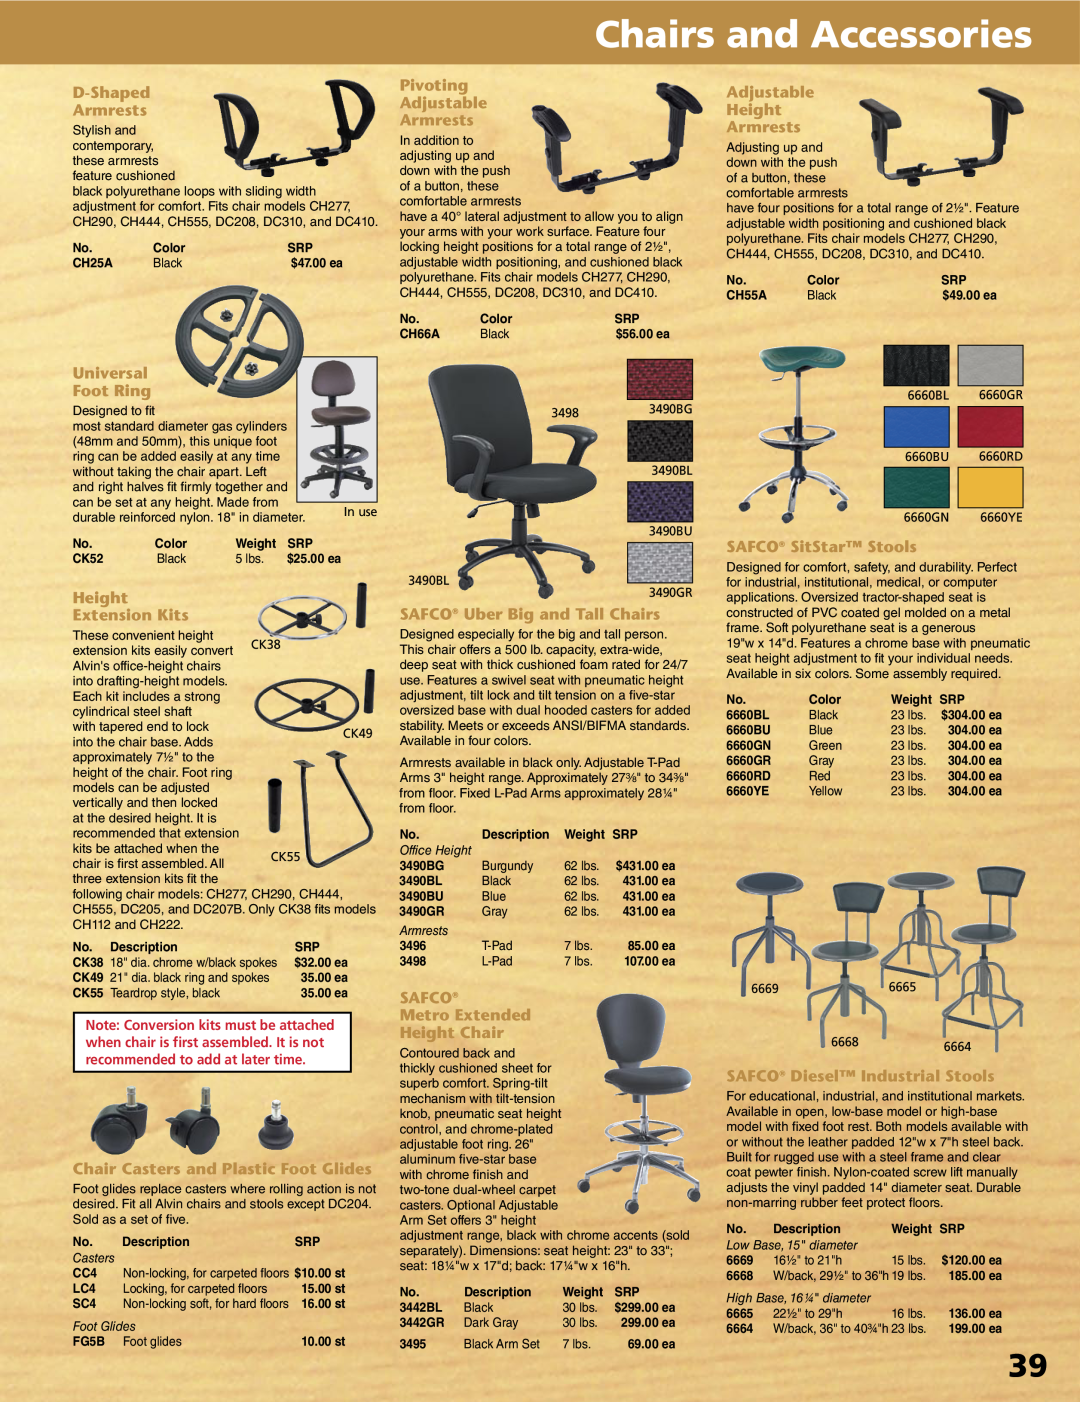 Alvin XV-3-XB, XX-4-XB Chairs and Accessories, D-Shaped Armrests, Pivoting Adjustable Armrests, Adjustable Height Armrests 